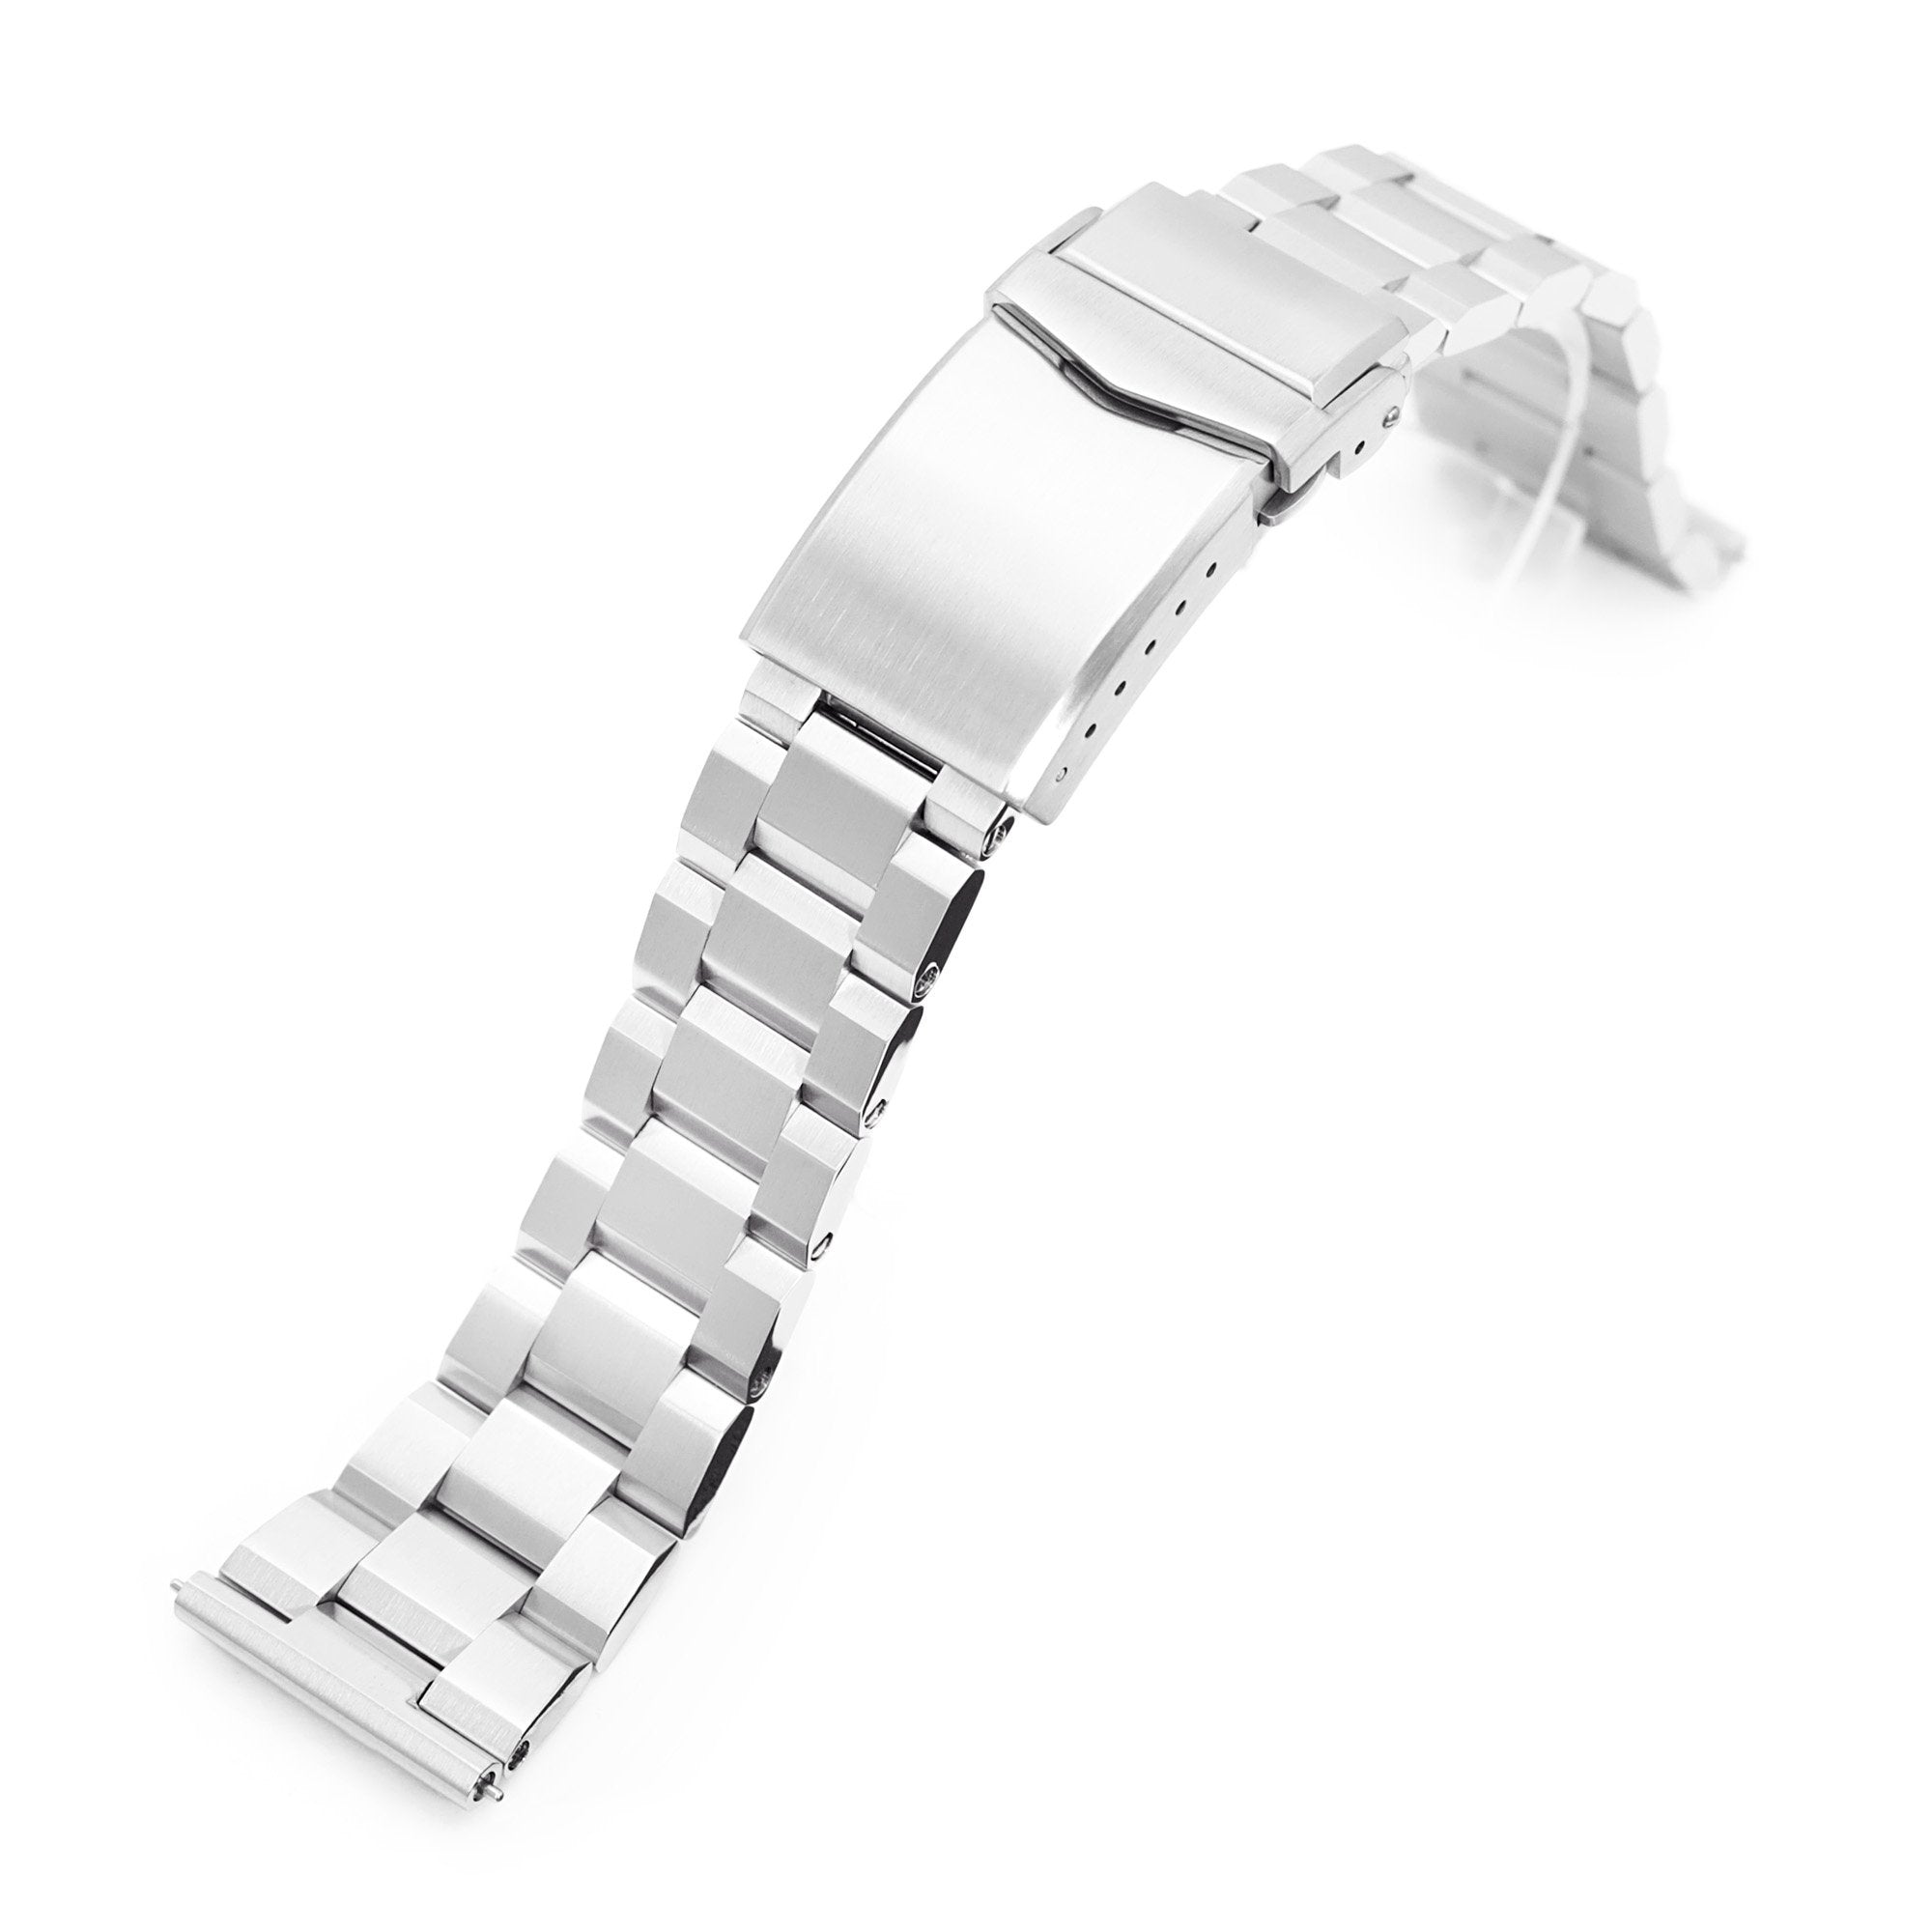 20mm Hexad III QR Watch Band Straight End Quick Release, 316L Stainless Steel Brushed V-Clasp Strapcode Watch Bands